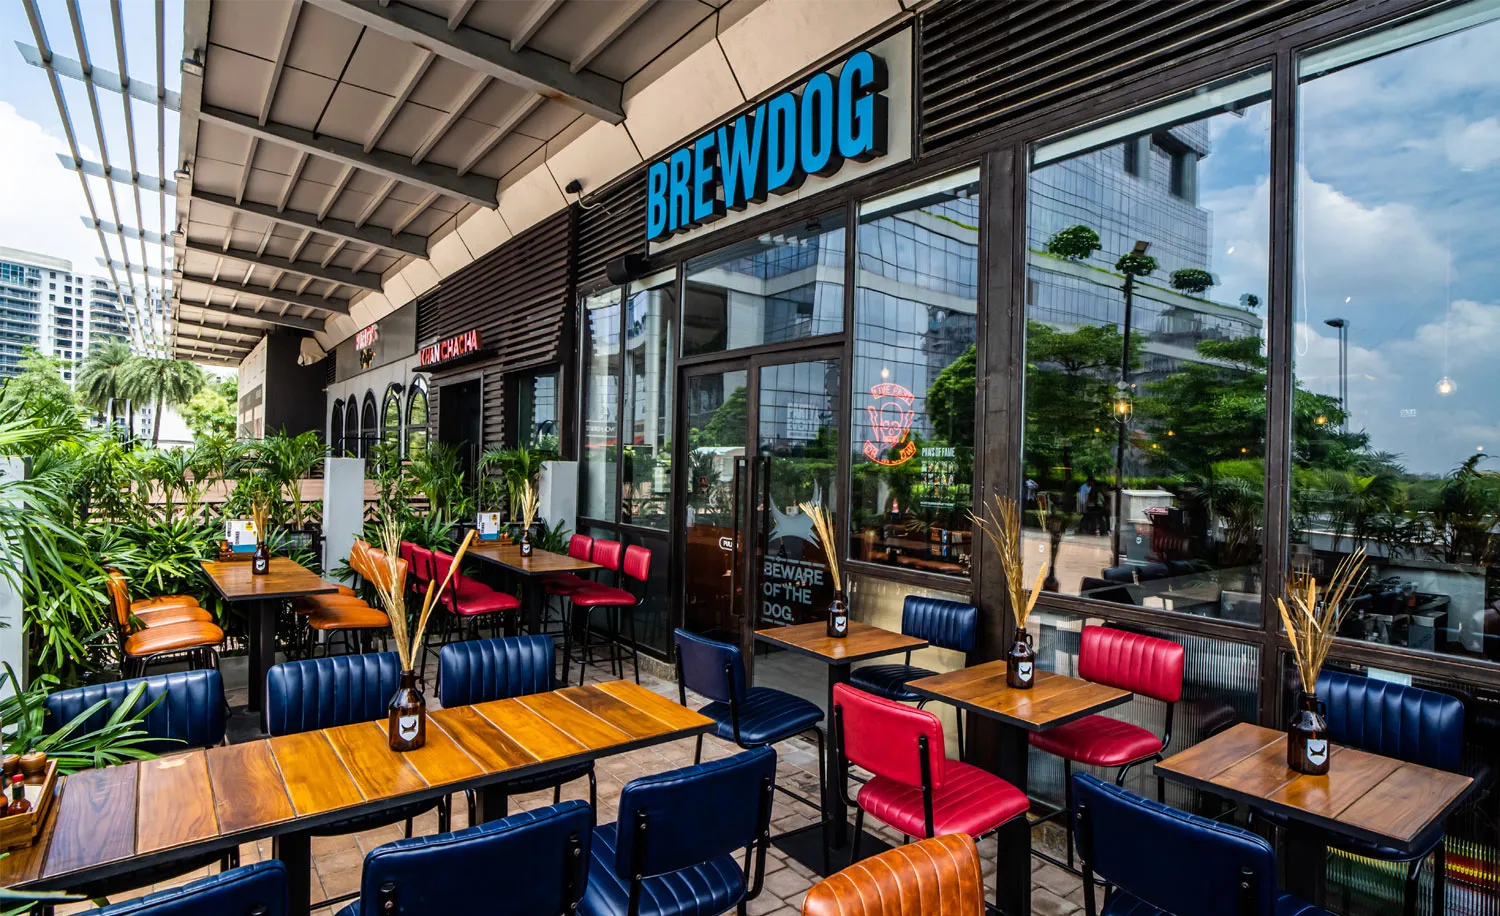 BREWDOG LOVES to put modern twists on retro-style beers